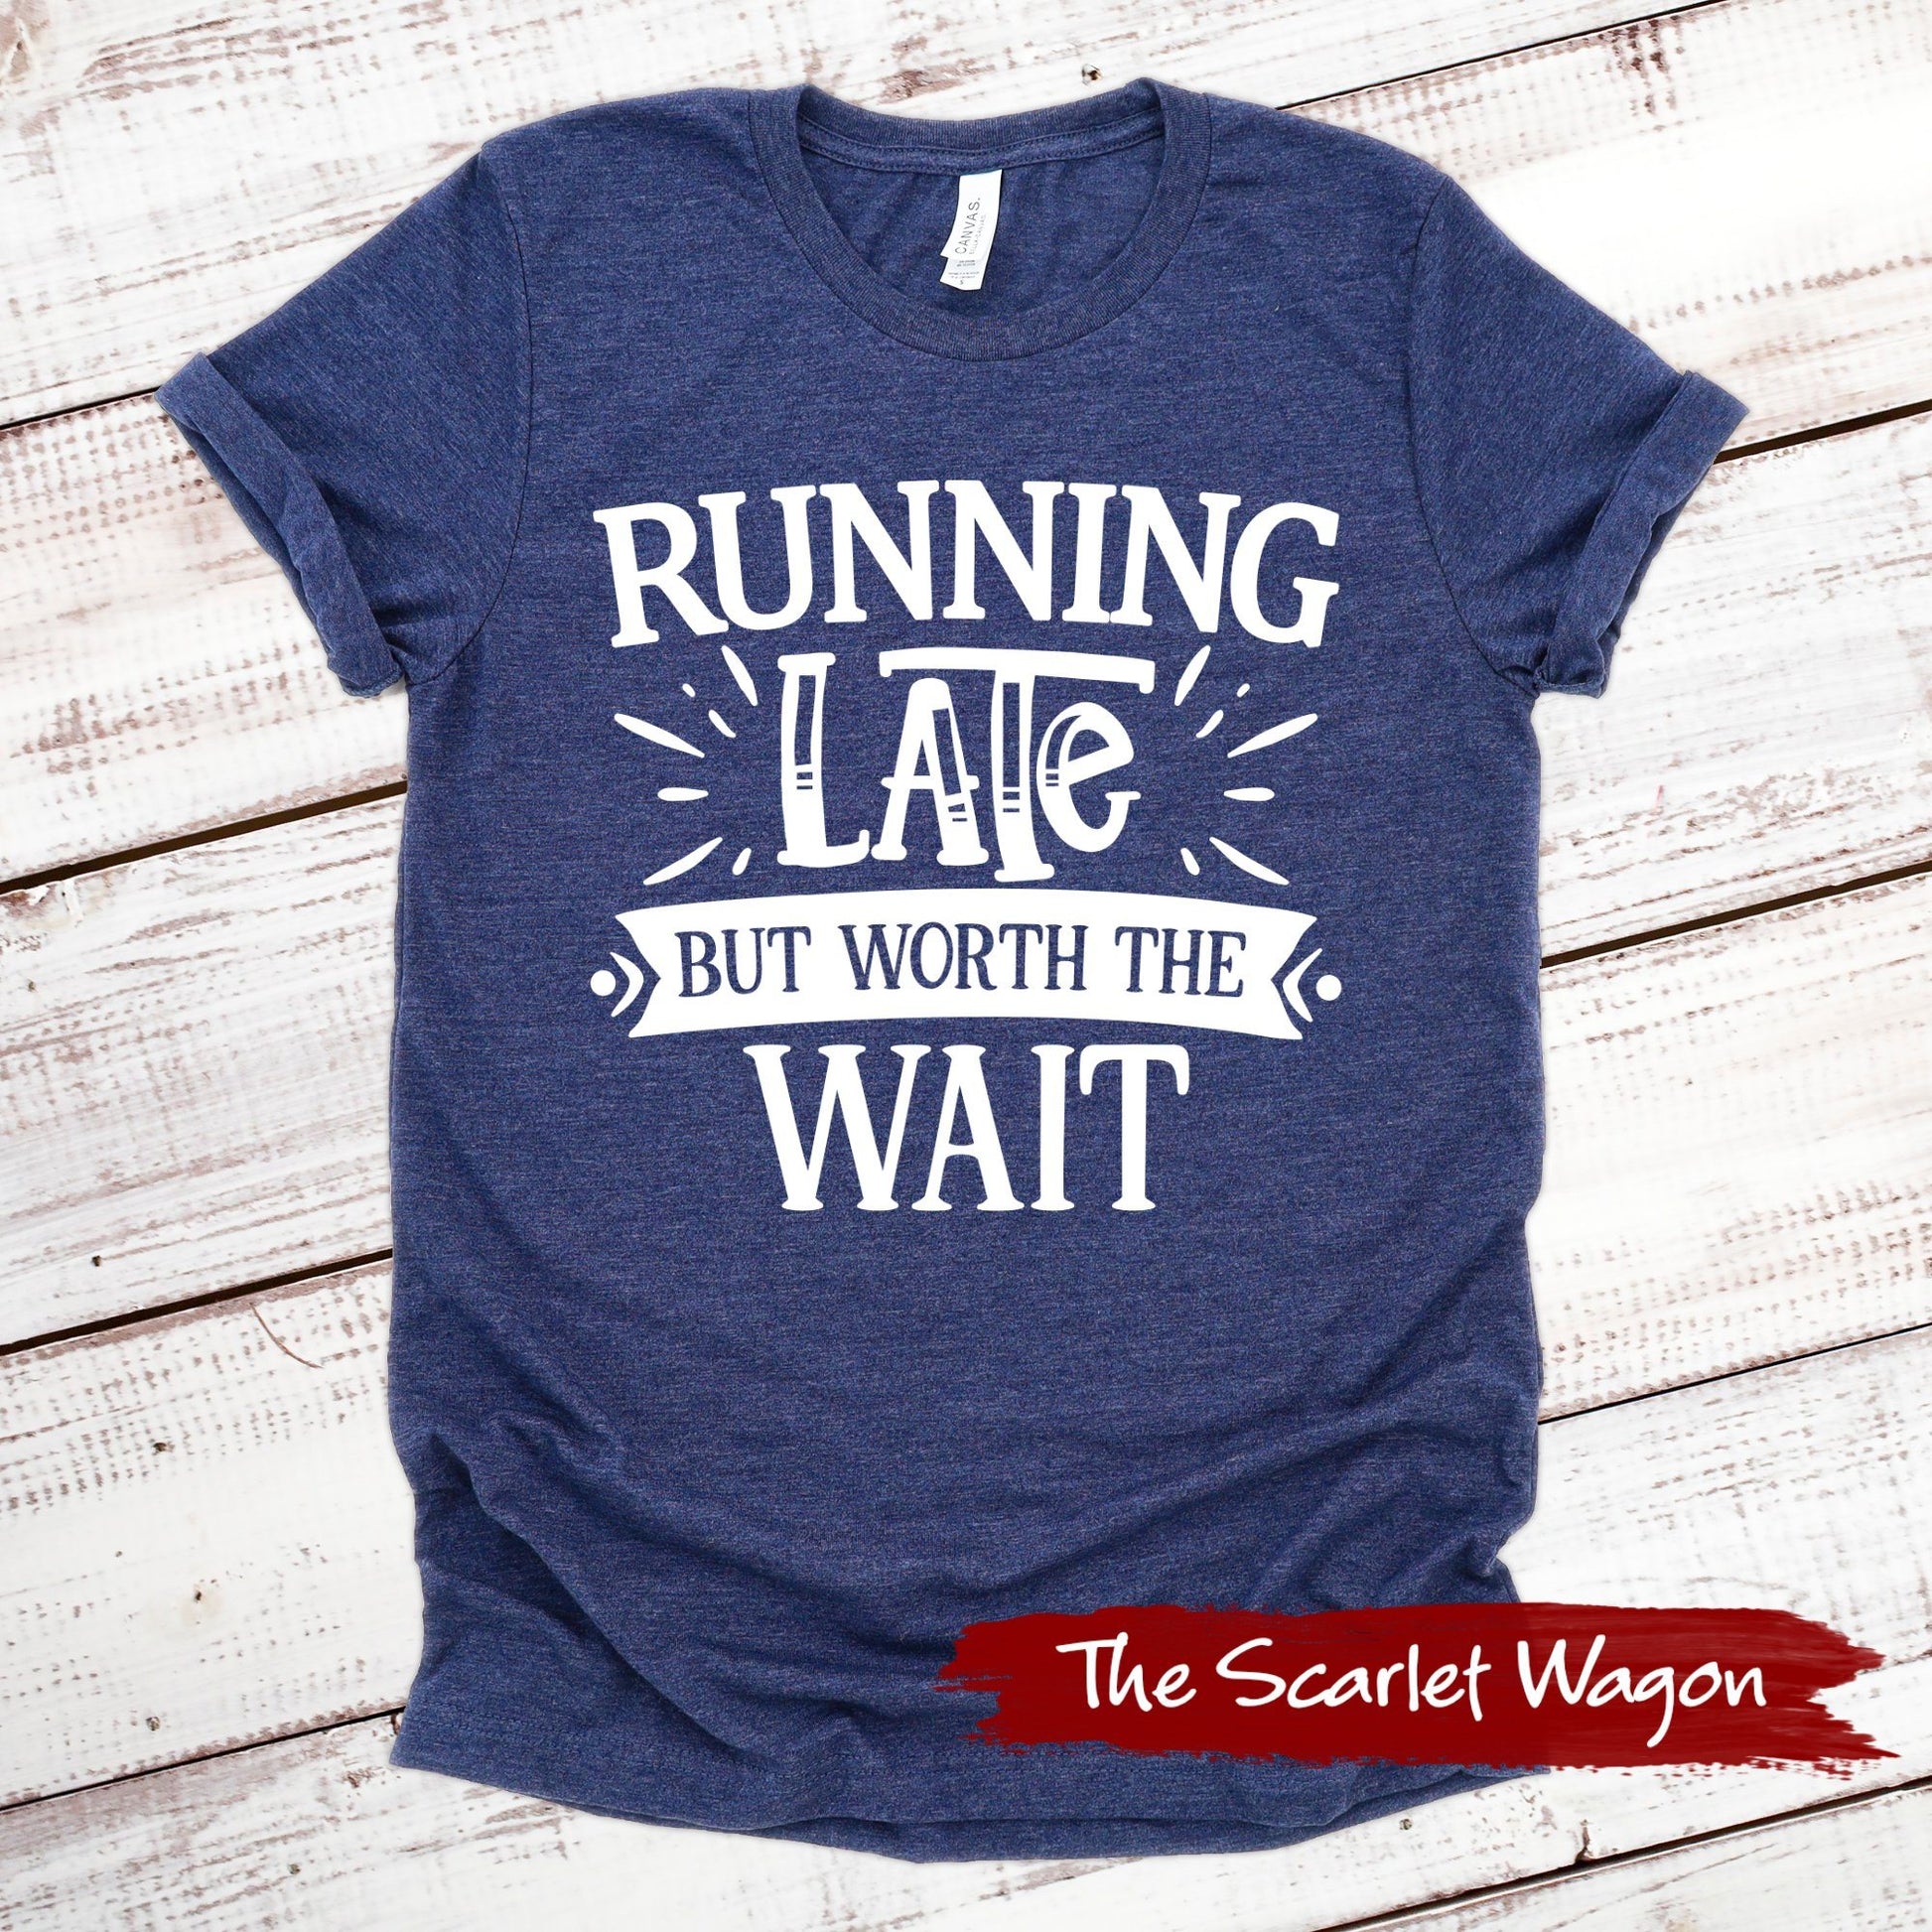 Running Late But Worth the Wait Funny Shirt Scarlet Wagon Heather Navy XS 